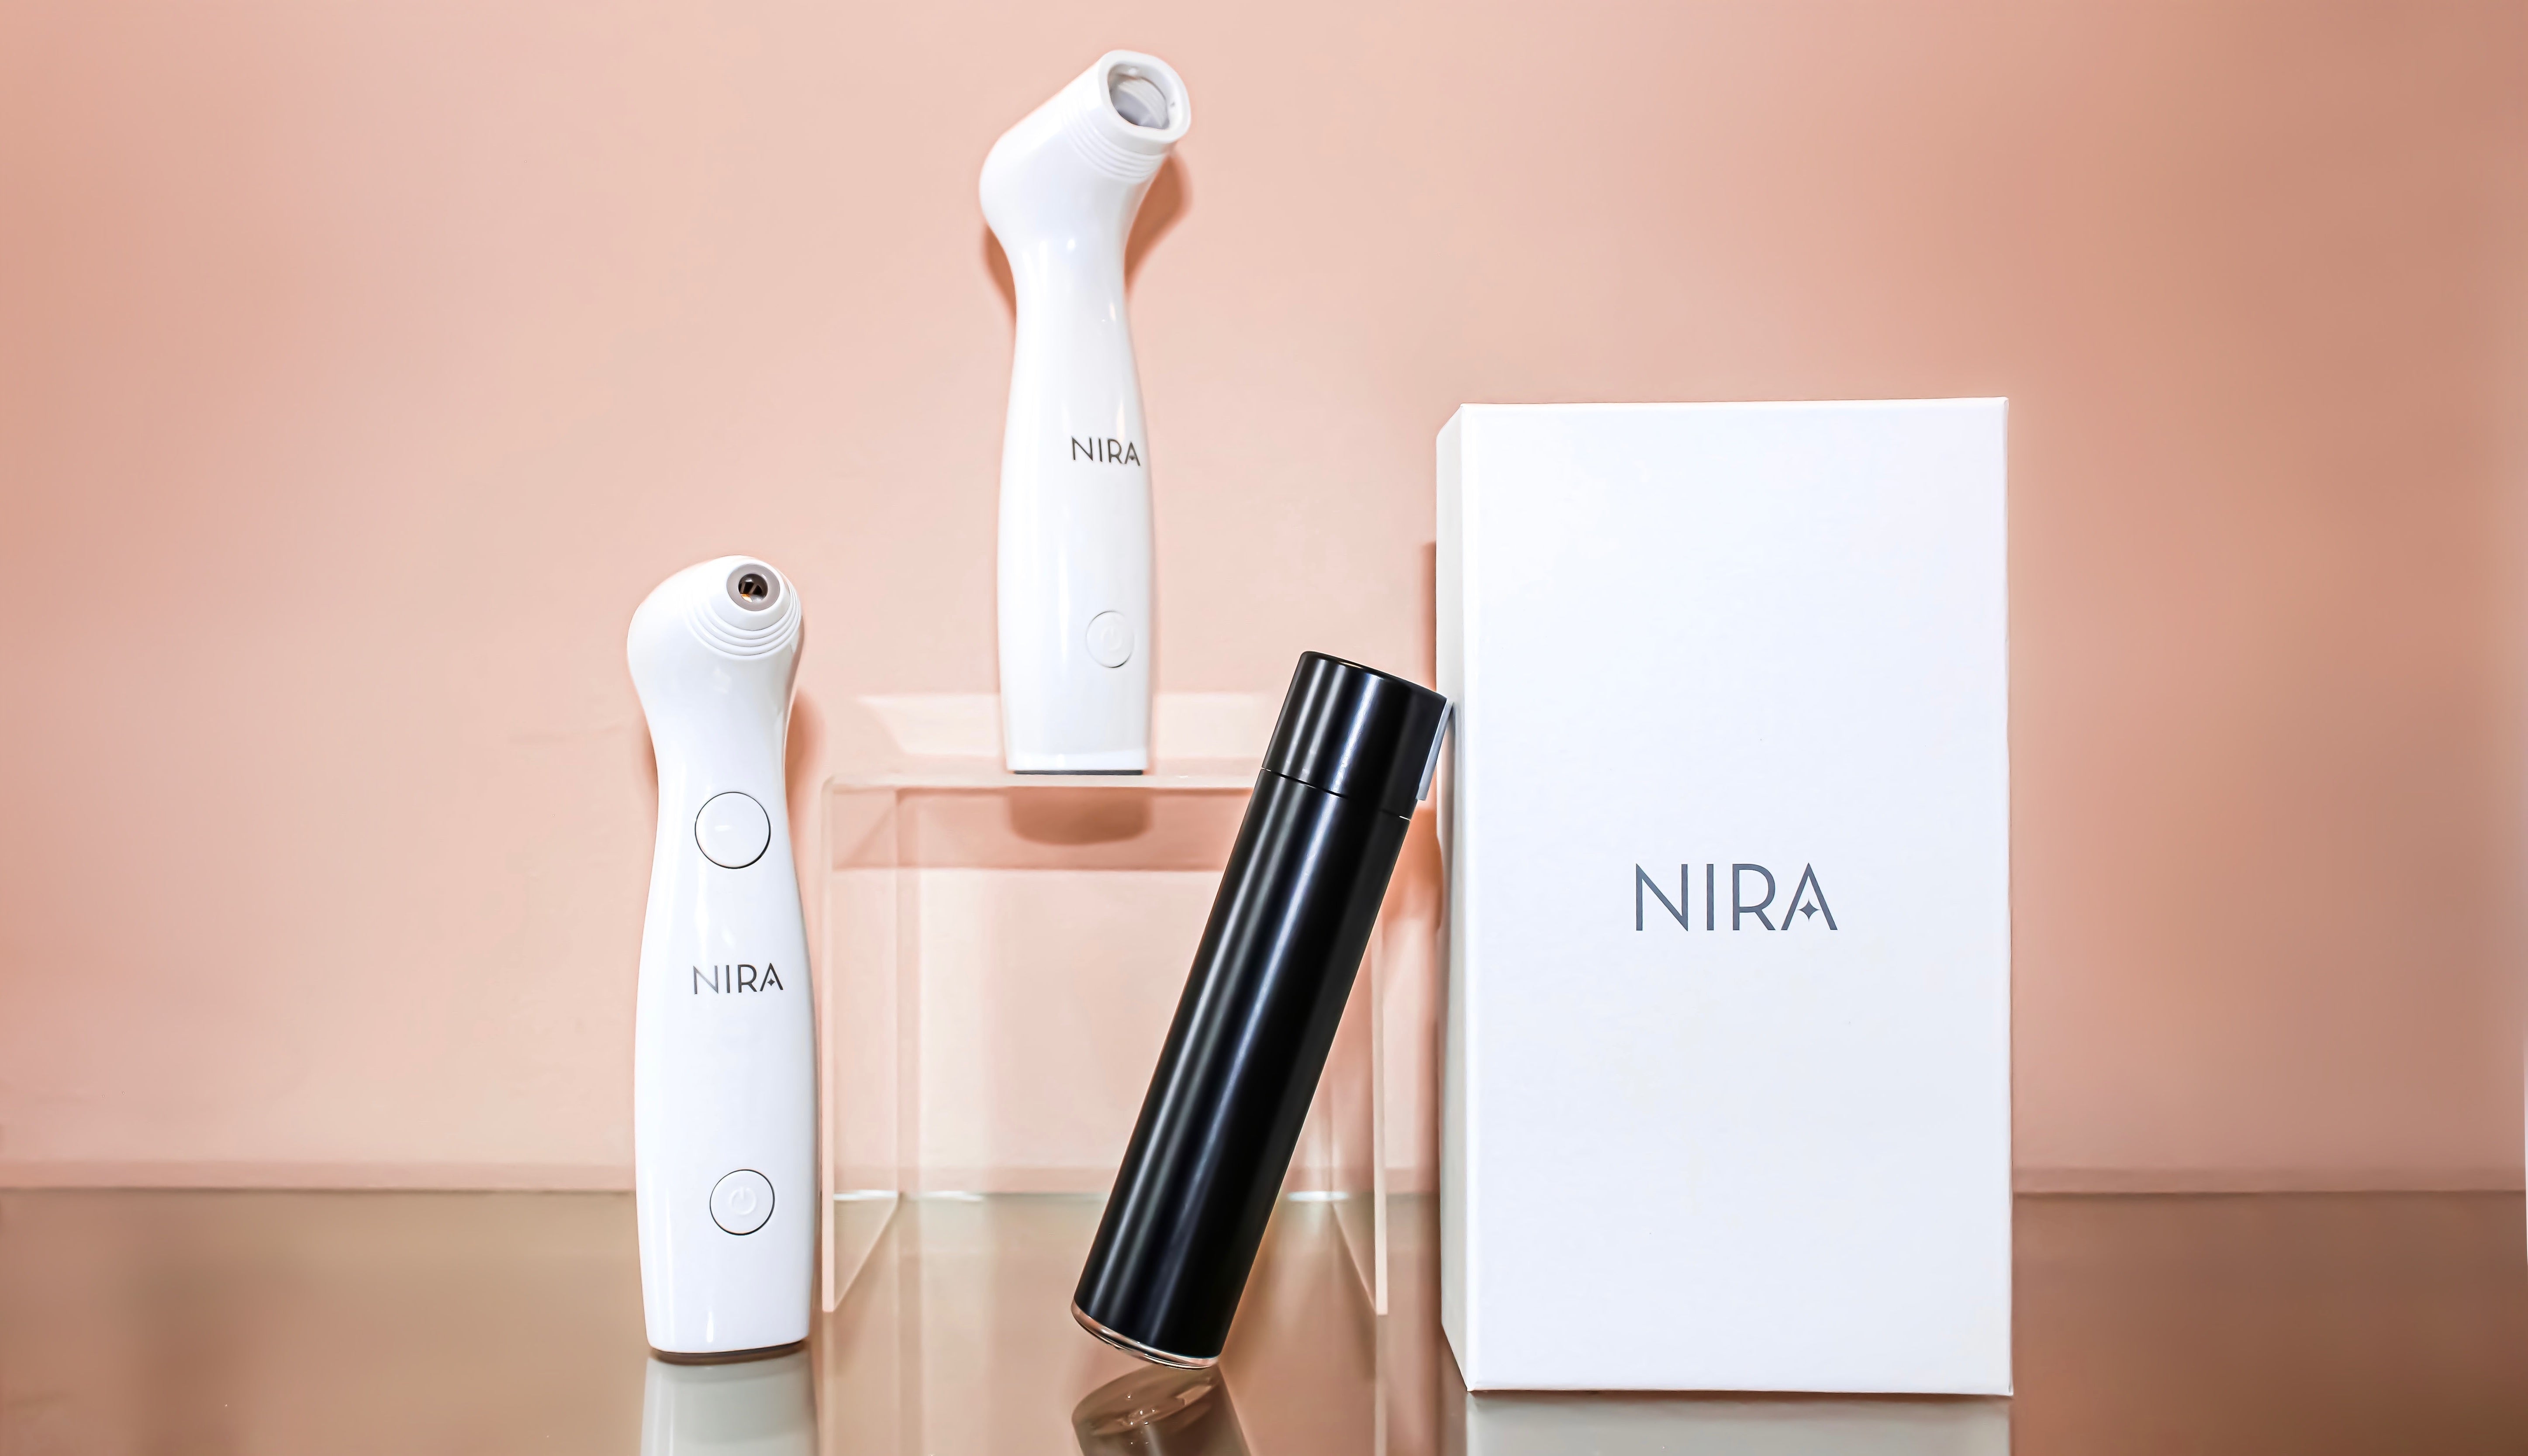 LYMA vs NIRA: The Difference Between These Anti-Aging Devices